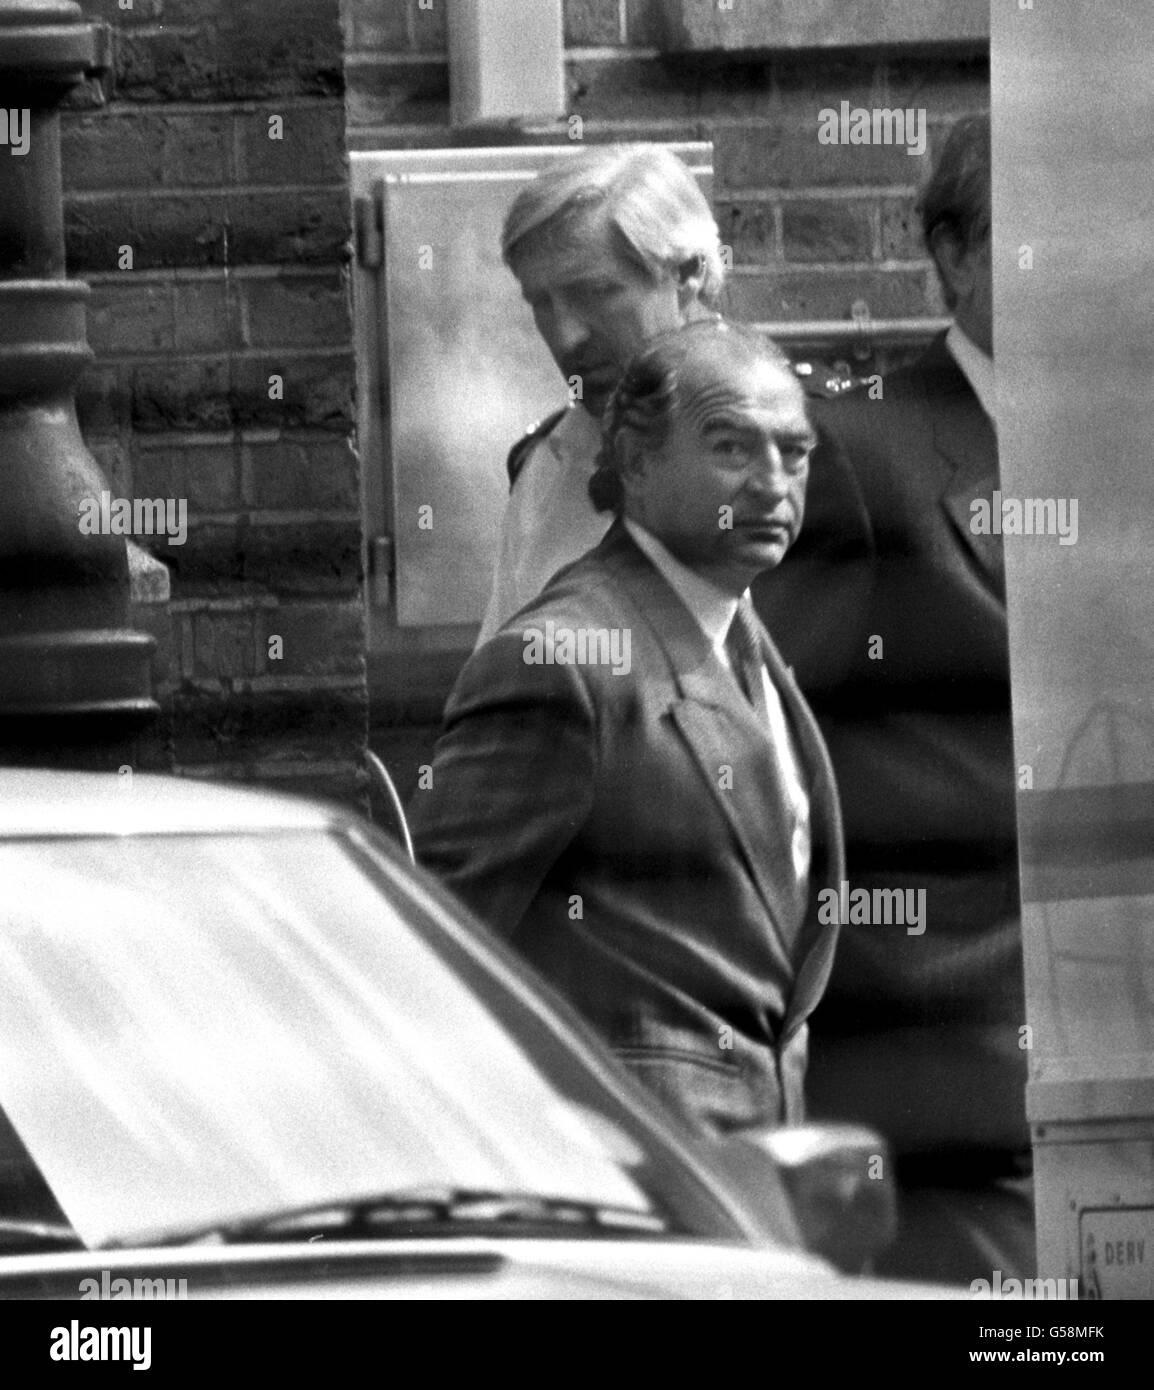 Frederick Foreman leaving Bow Street Magistrates Court in custody, in London, after being remanded, charged with the robbery of nearly $6 million from Security Express in 1983. Stock Photo